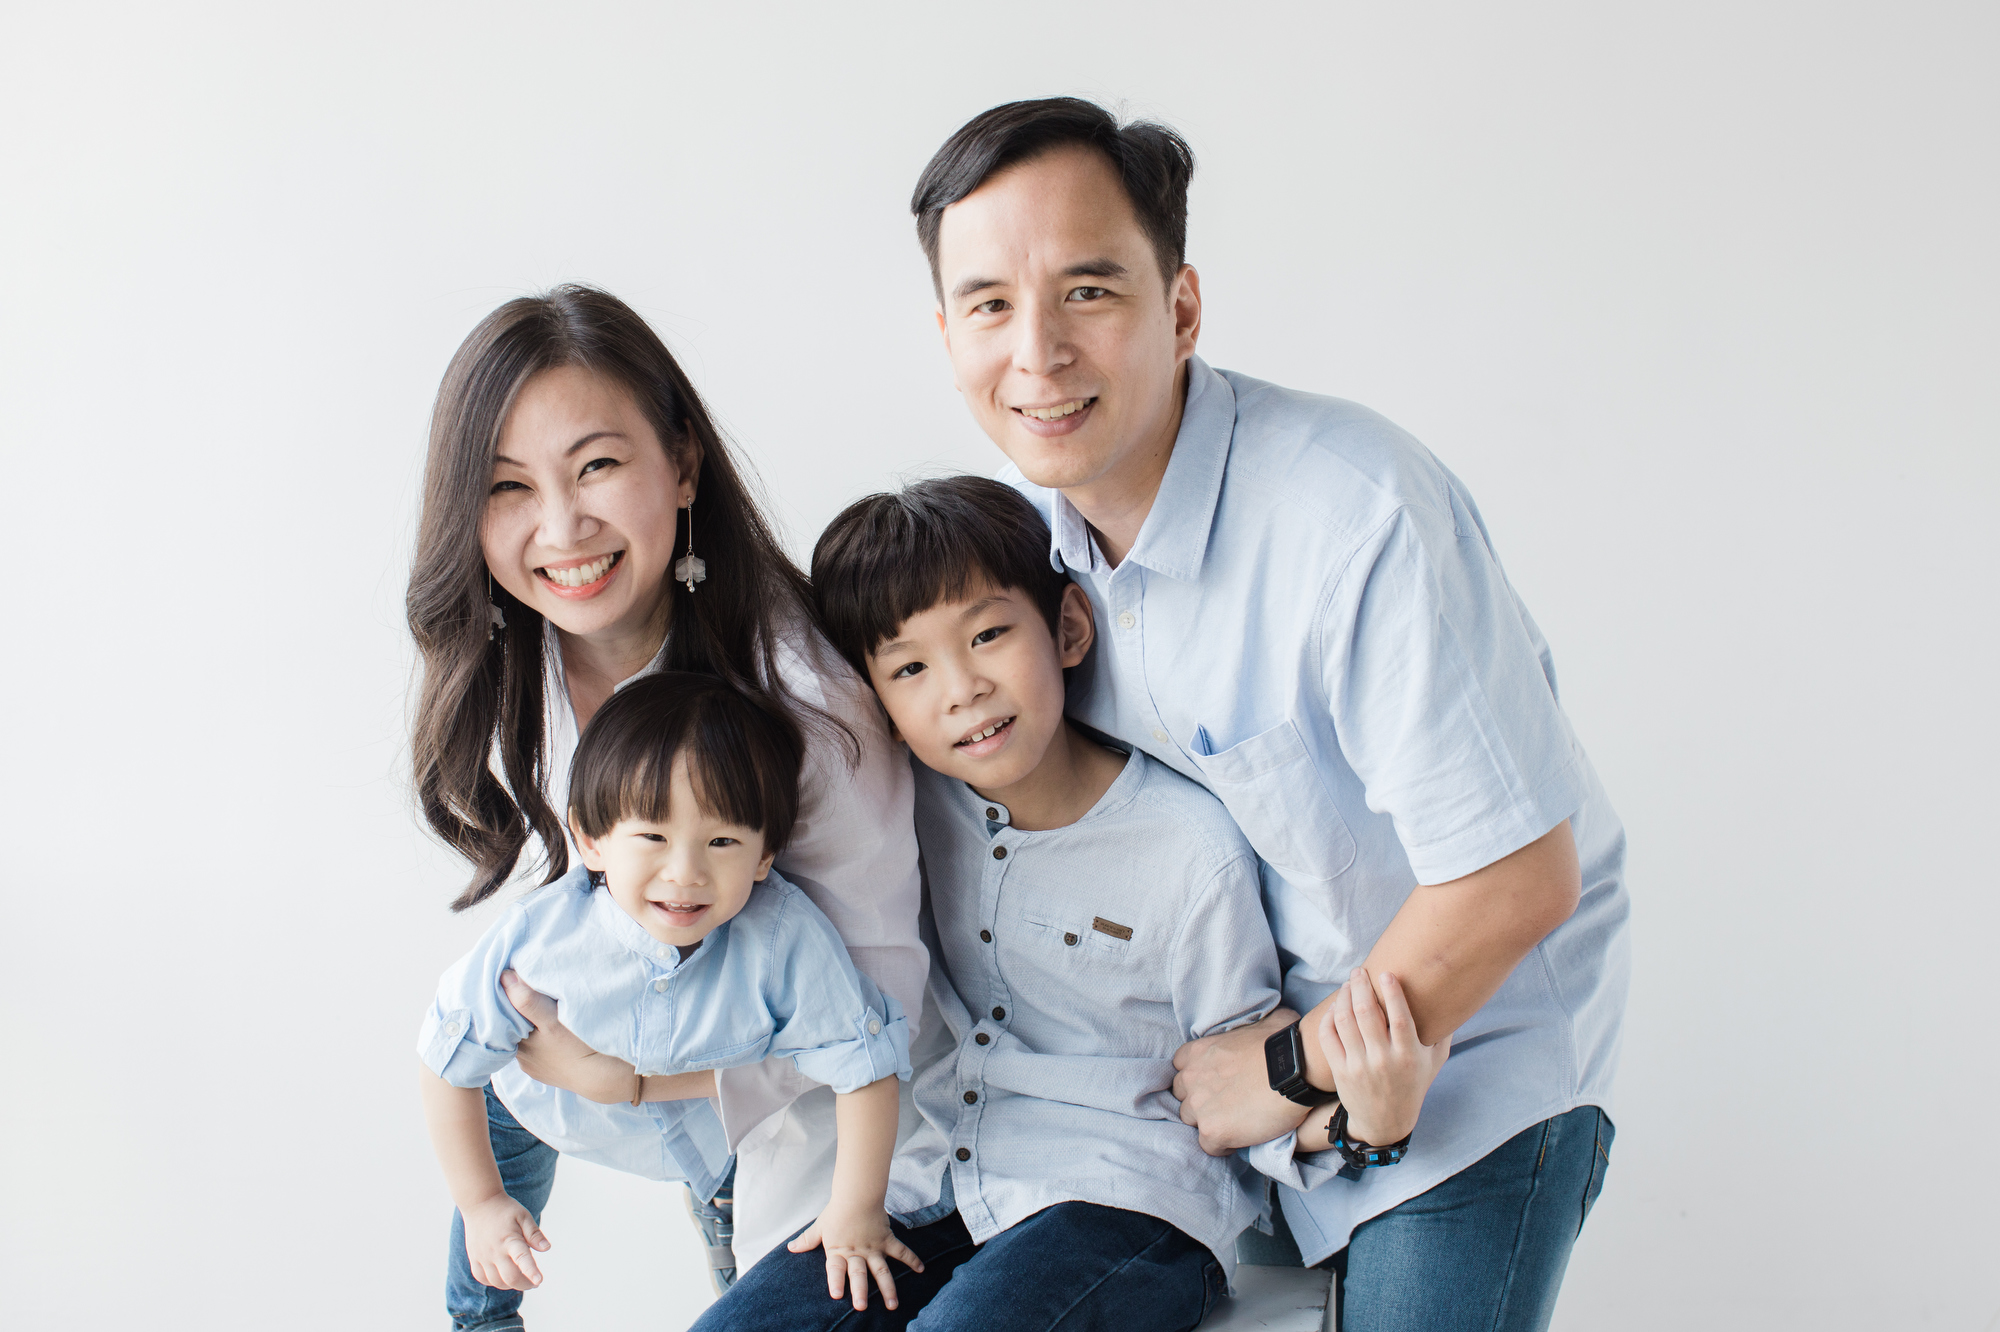 Being A Full-Time Corporate Woman and Mom: 5 Things I’ve Learned, by Chayenne Tan